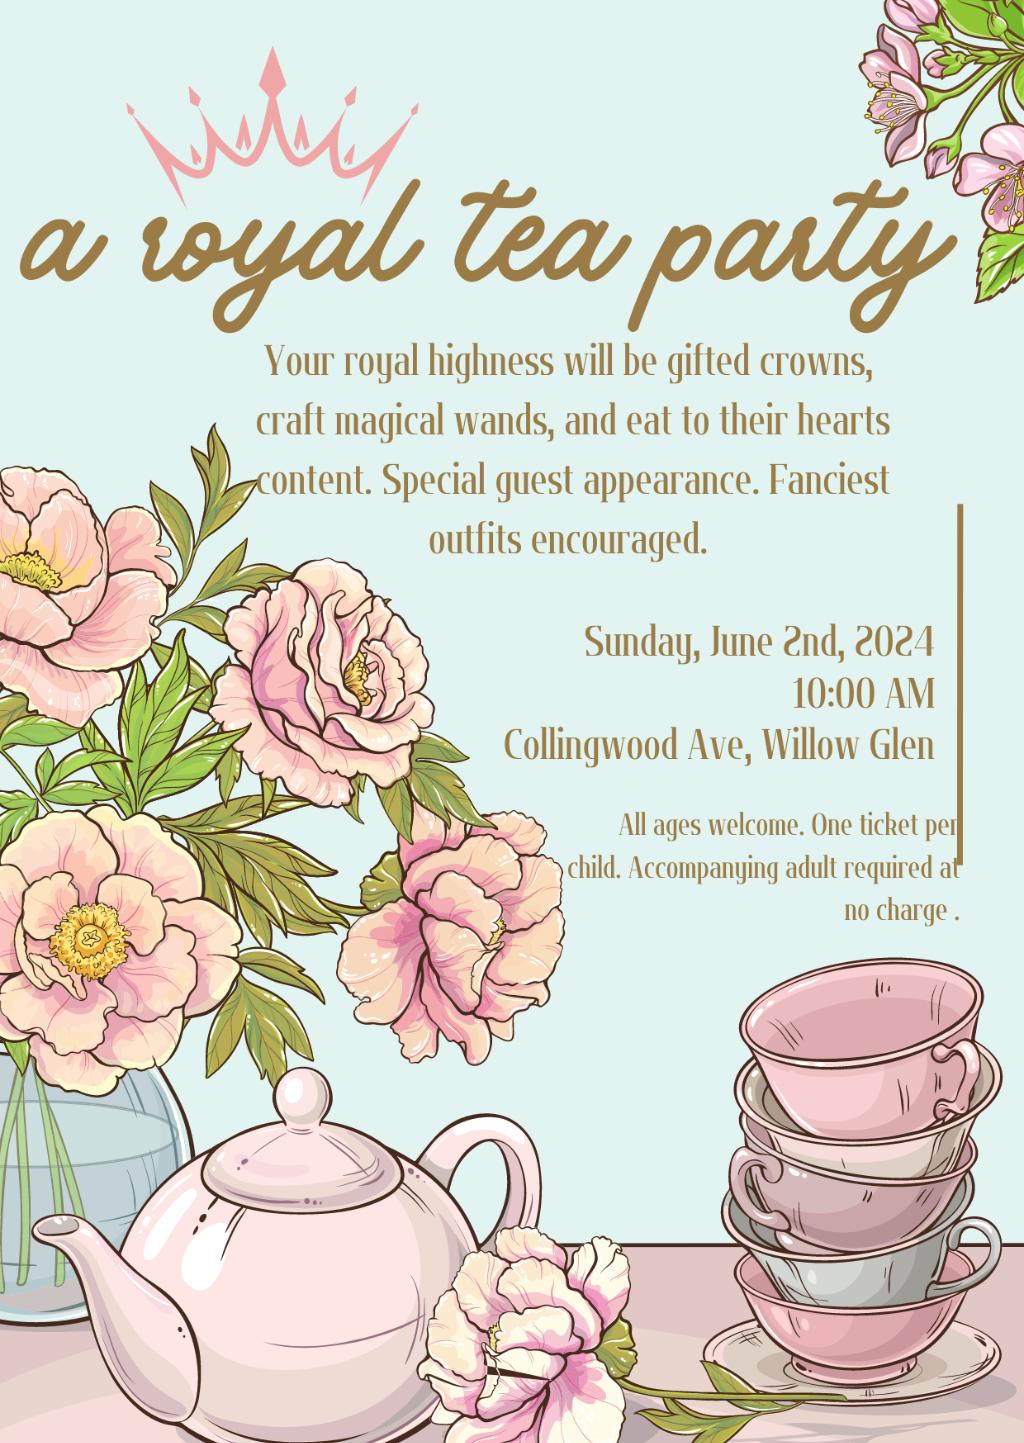 Parties -  ticket to attend A Royal Tea Party for up to 24 little princes and princesses